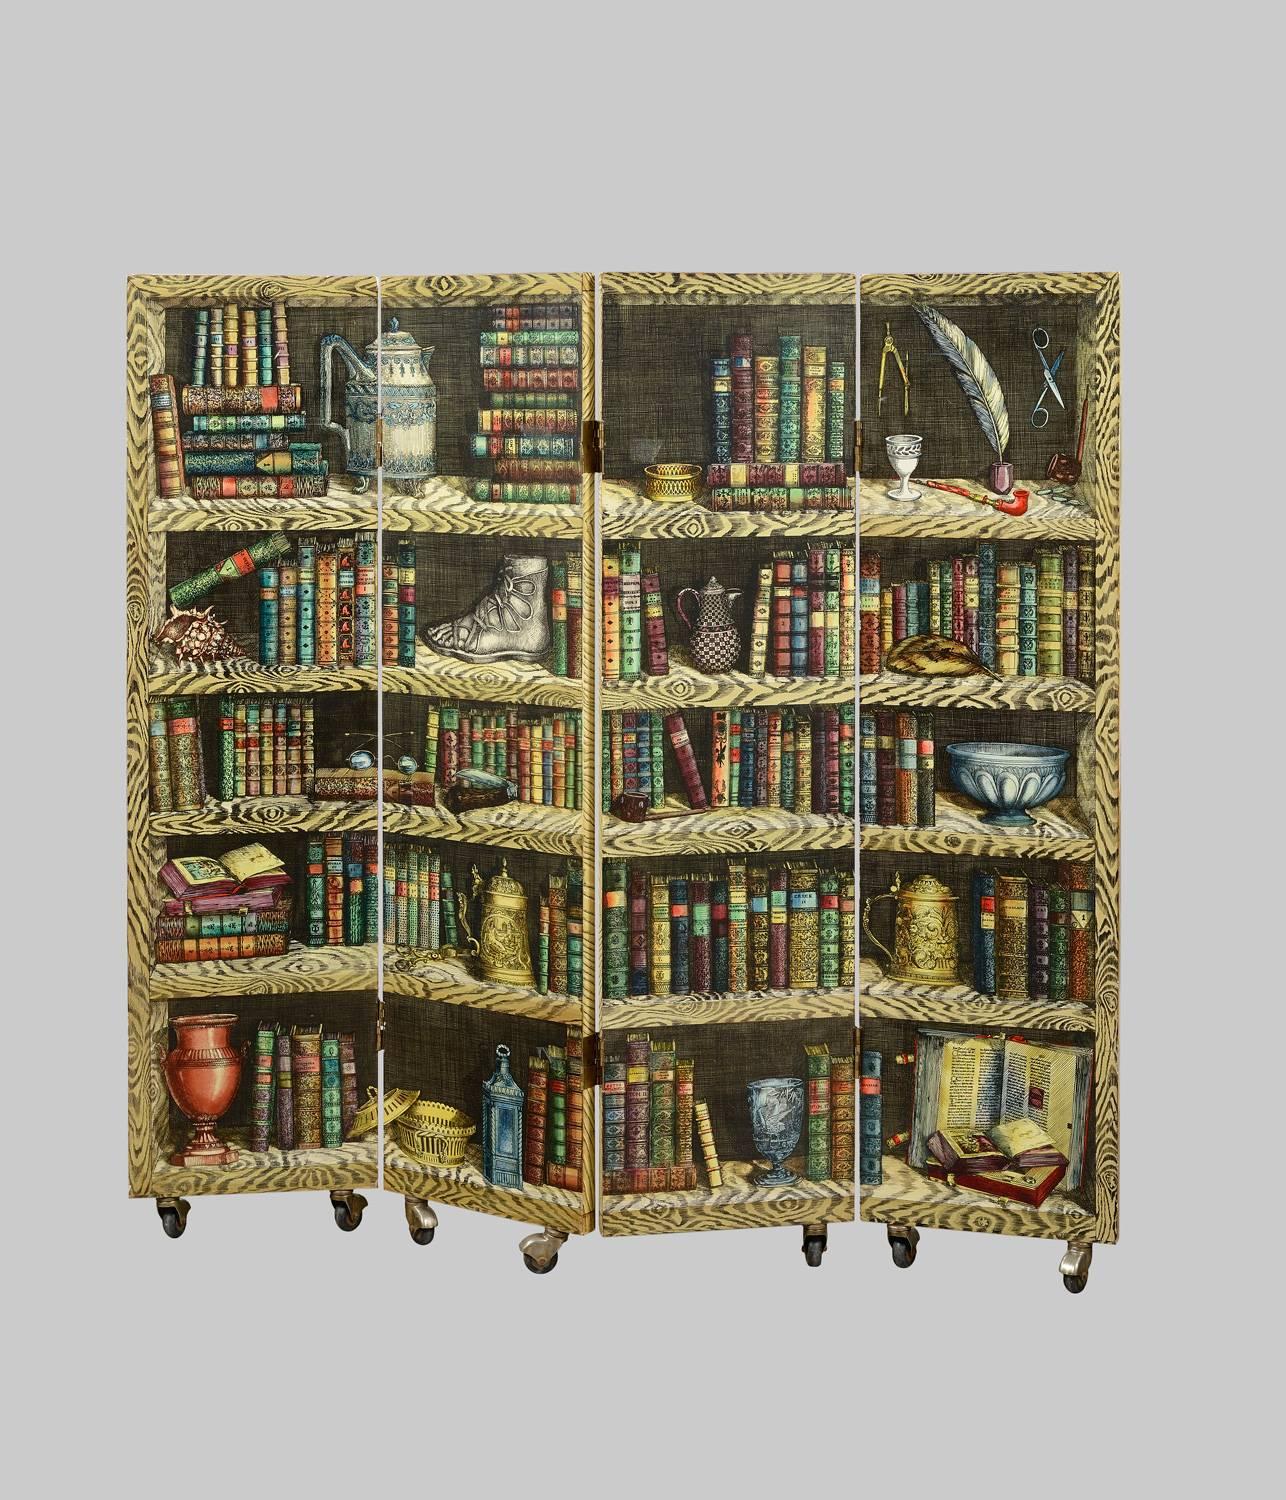 Screen by Piero Fornasetti, 1813-1988,

circa 1950.

Wooden structure of four panels.
Lithographed decoration double face on one side representing a composition musical instruments and on the other a library of books.
Mobile on